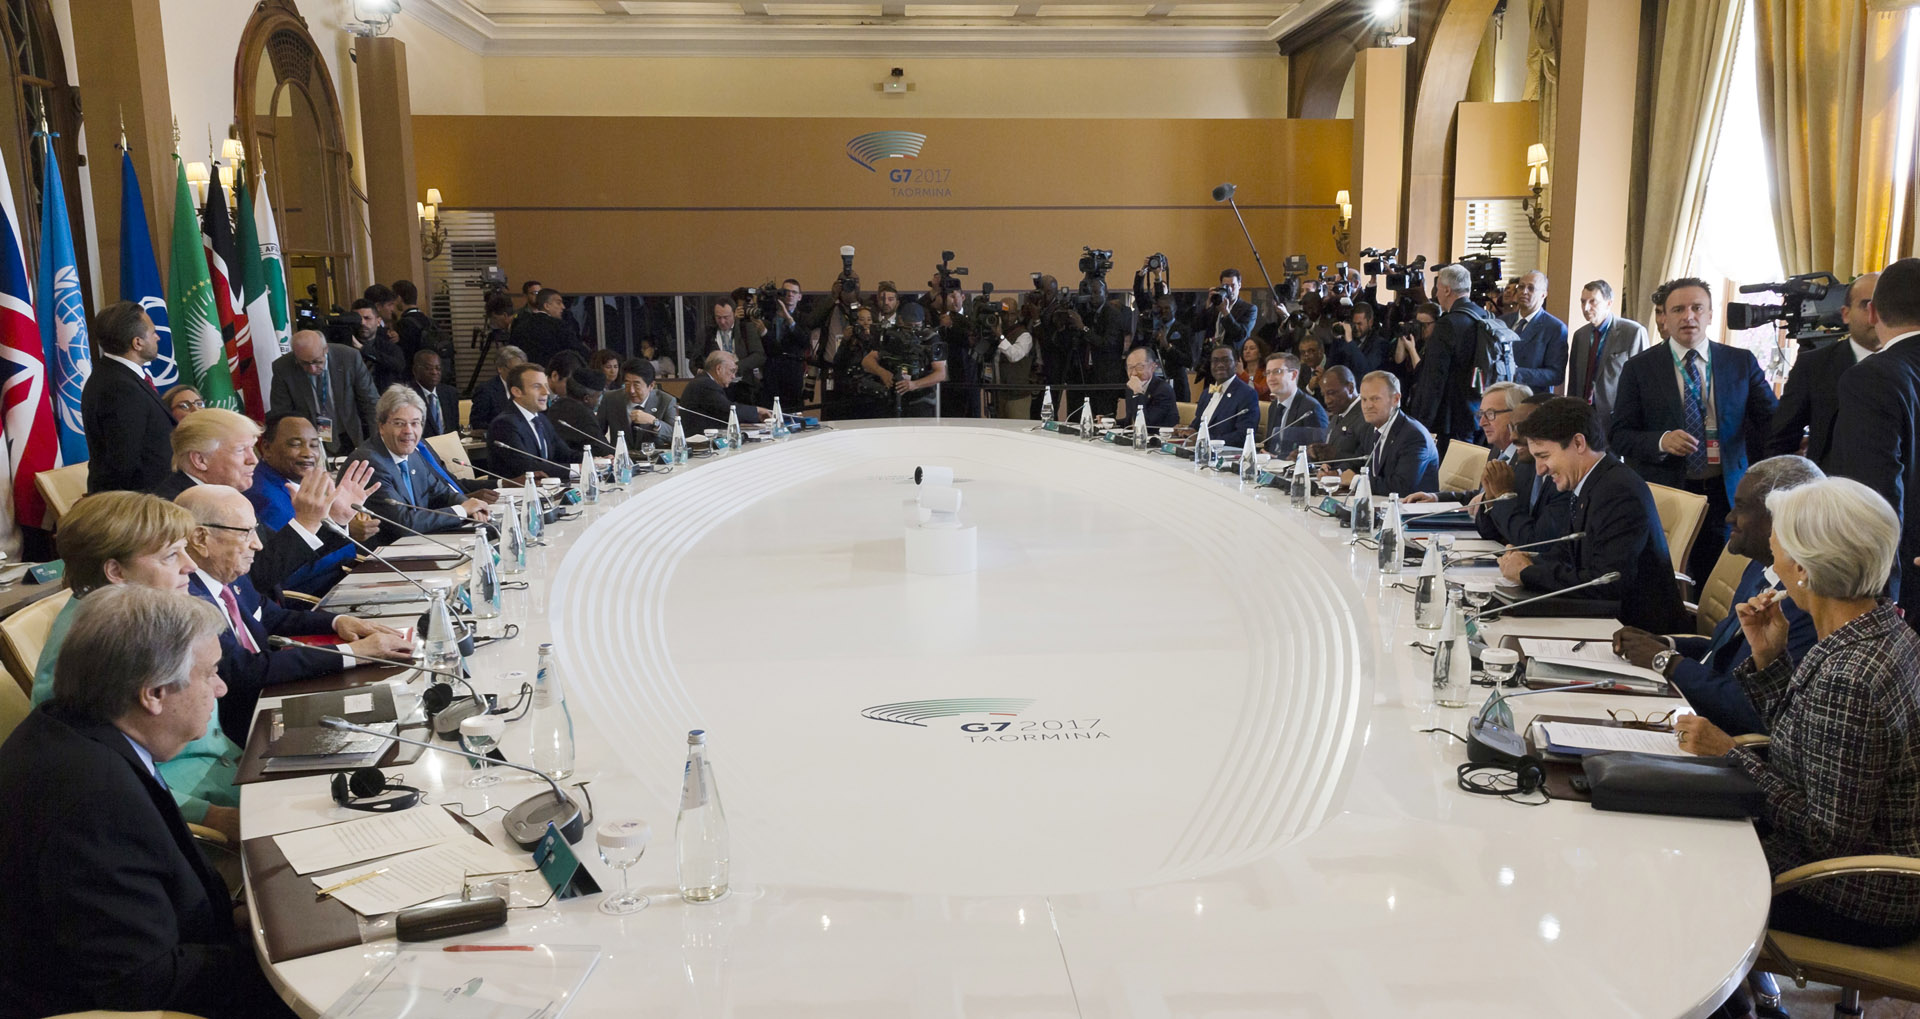 G7 Summit concludes with more questions than answers